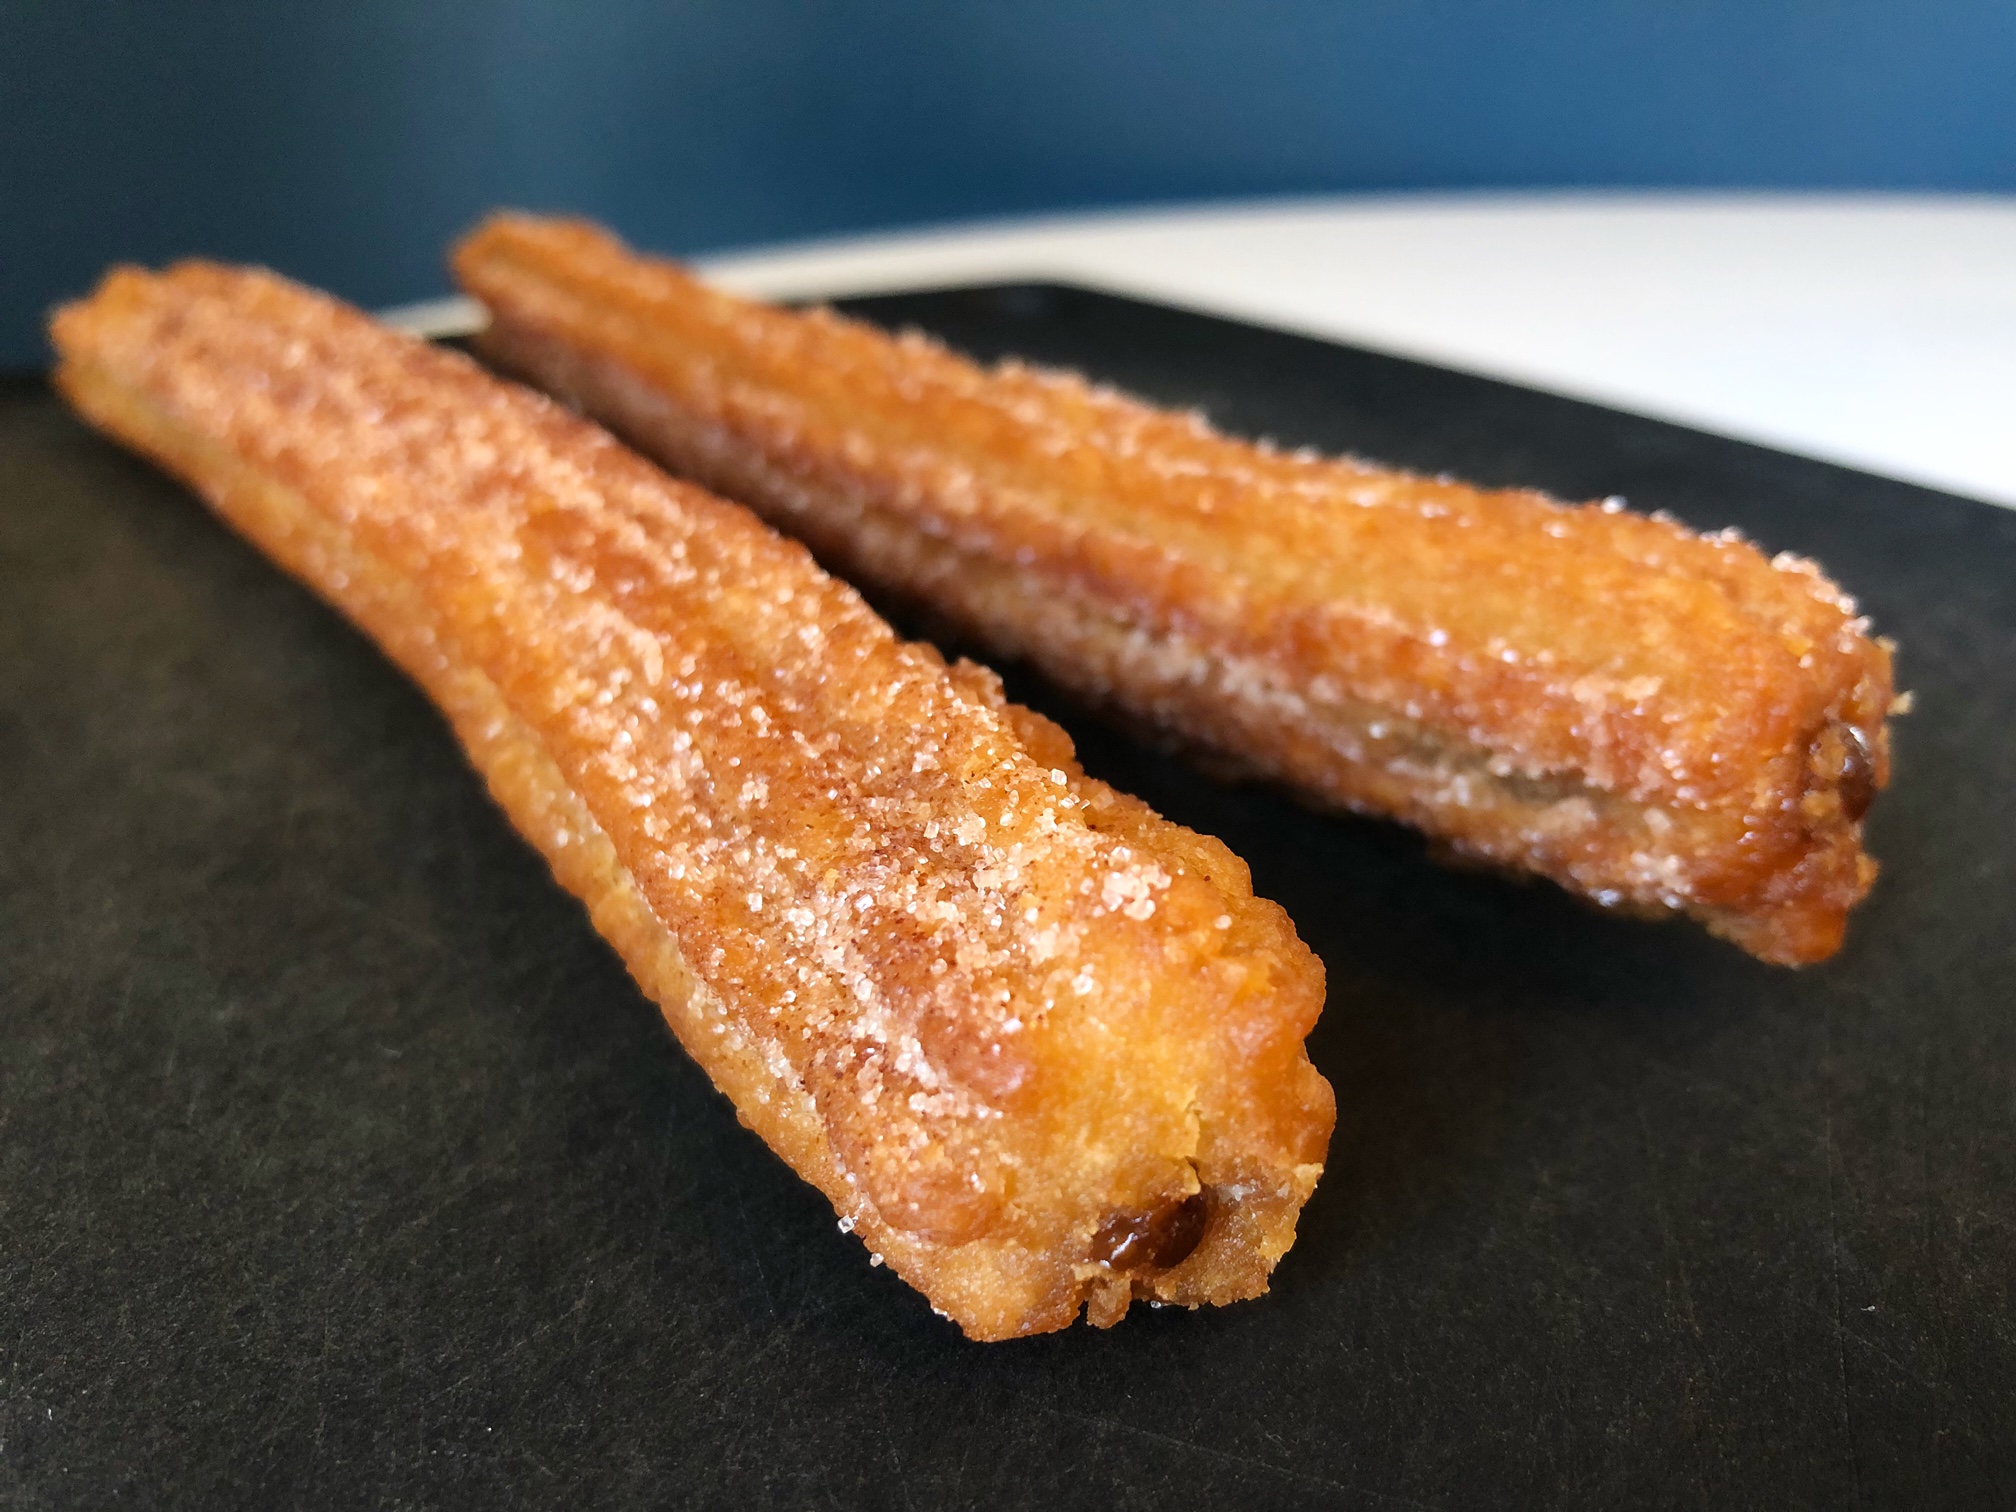 On a black cutting board, two churros from Rick's Bakery in Urbana are laying at an angle to the camera revealing the texture of the exterior and a little dot of the inside sugar on the end. Photo by Alyssa Buckley.